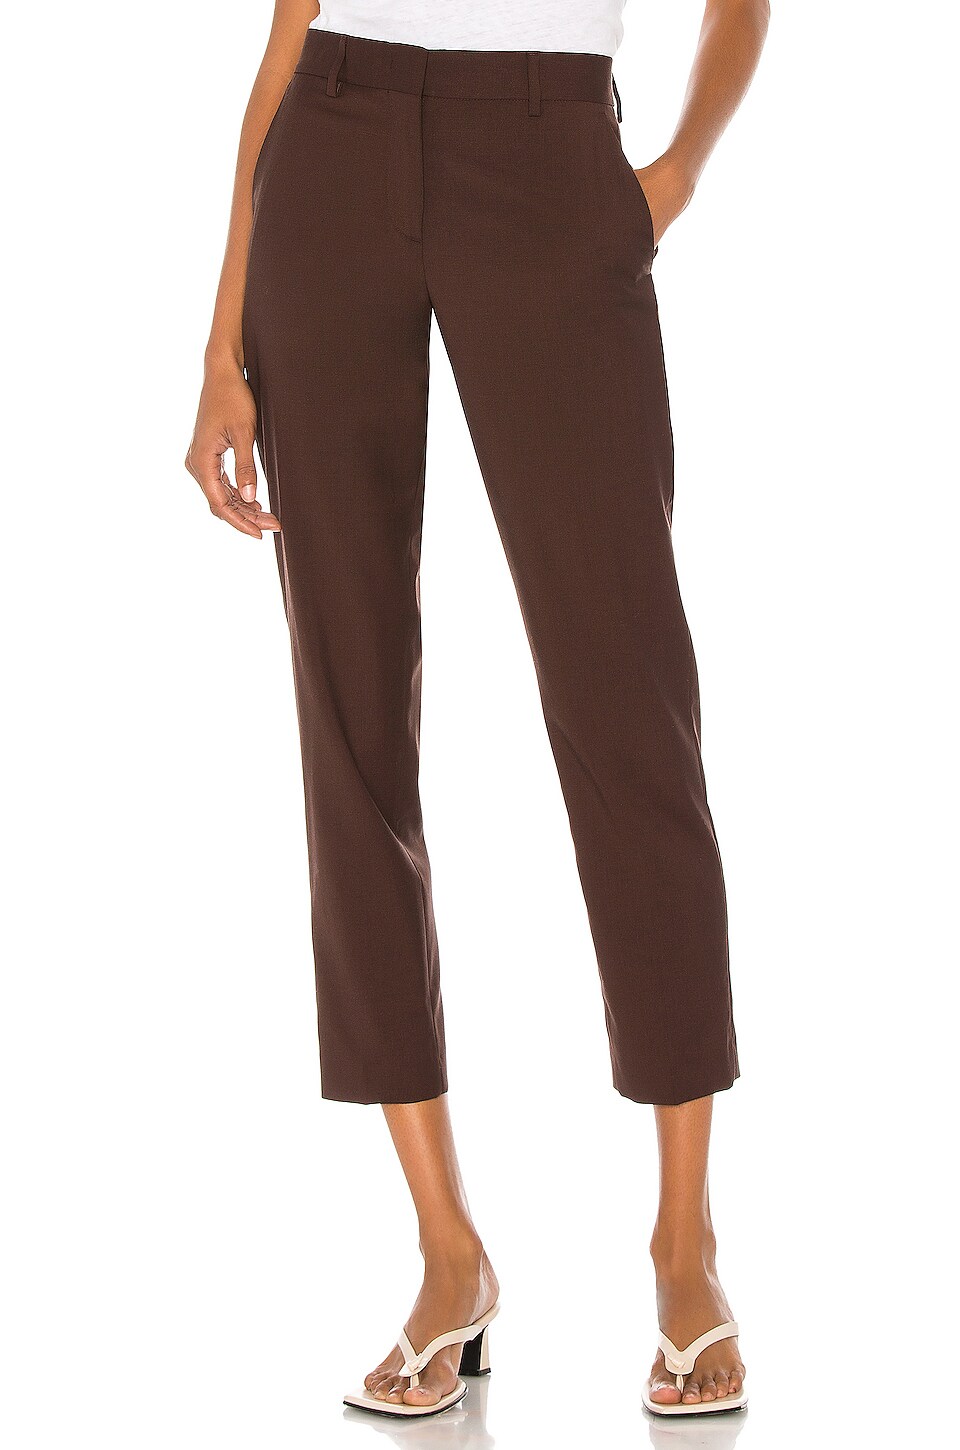 MSGM Tailored Pant in Chocolate | REVOLVE